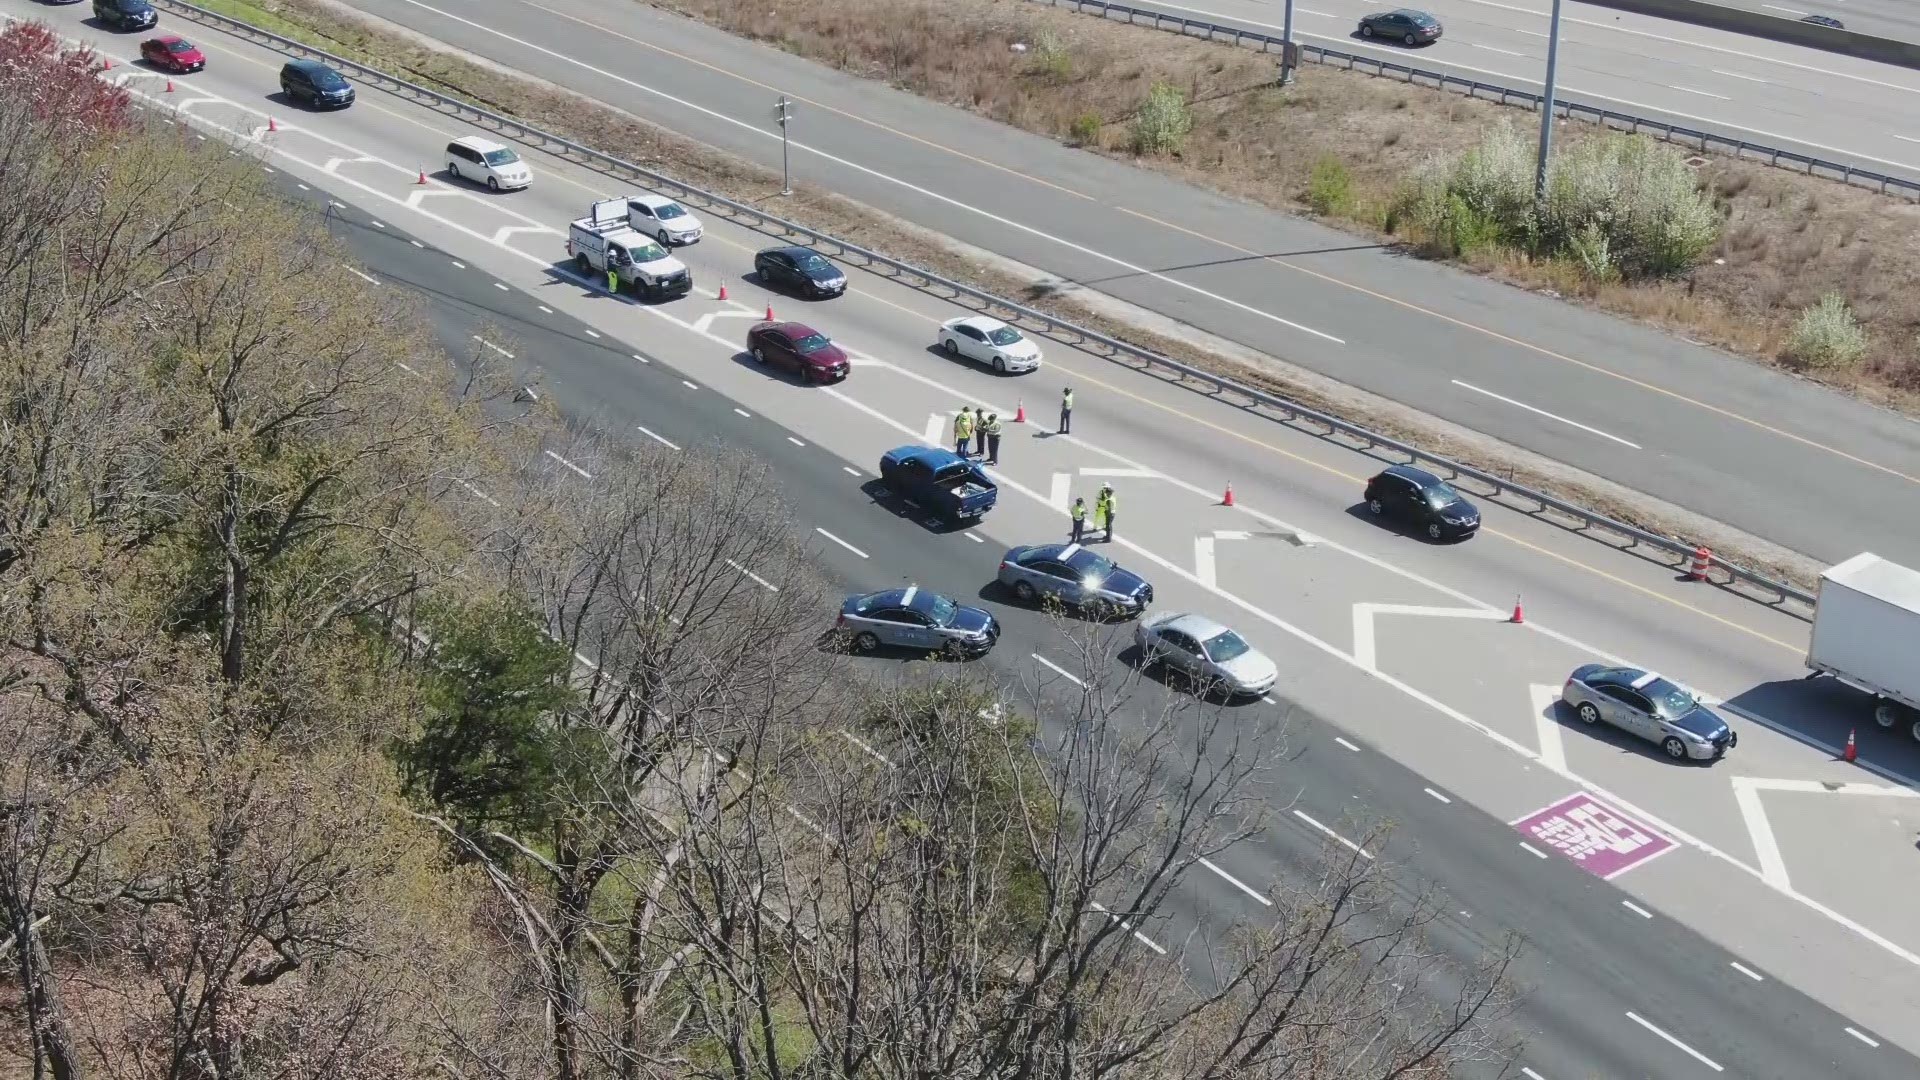 Virginia State Police engaged in two chases with the motorcyclist earlier in the day, but he was not being pursued at the time of the crash.